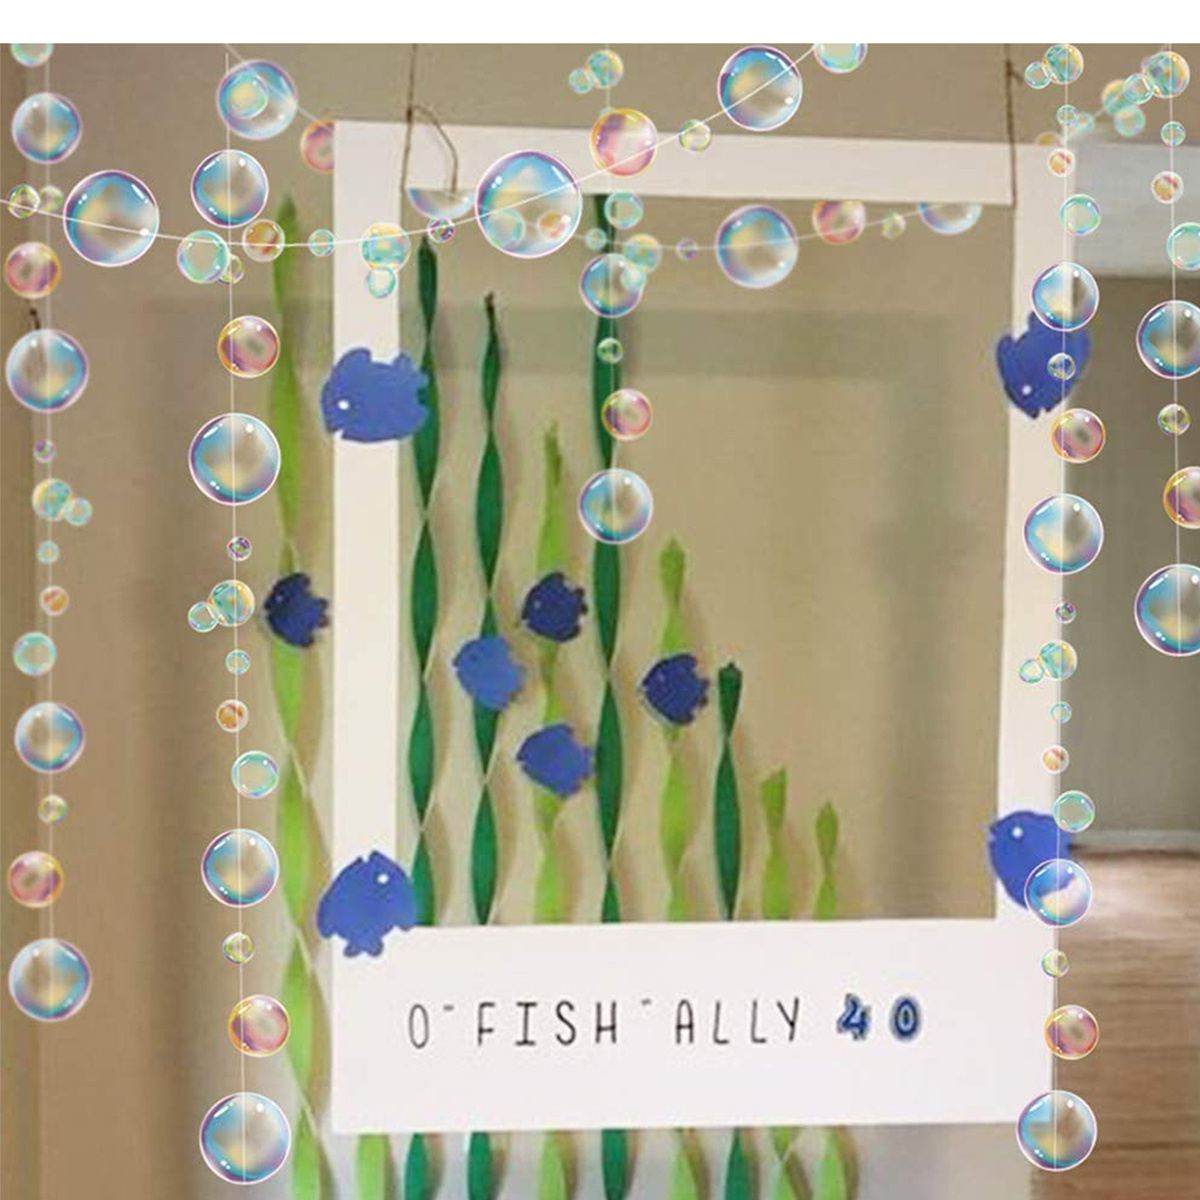 Transparent Bubble Garlands Mermaid Party Decoration Colored Blue Flat Cutouts Hanging Streamer for Birthday Baptism Wedding Ocean Wall Decal Baby